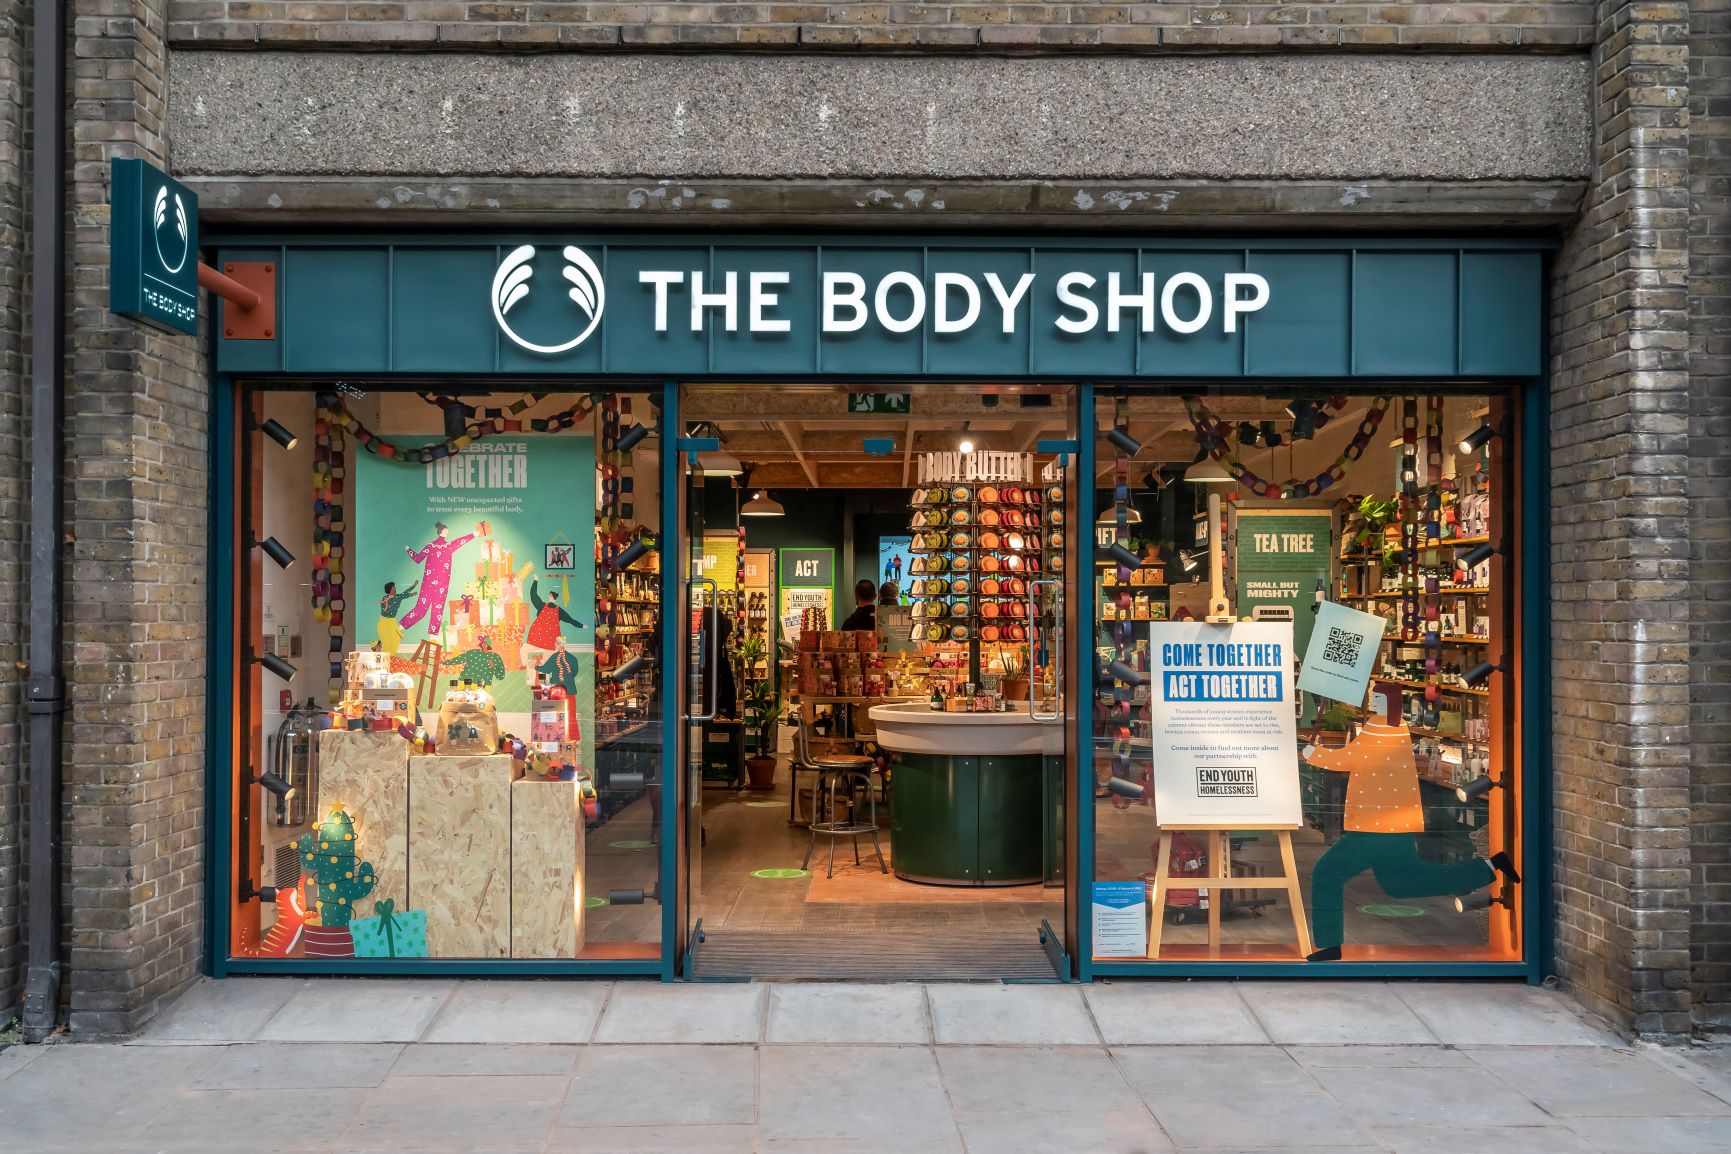 Images The Body Shop - CLOSED